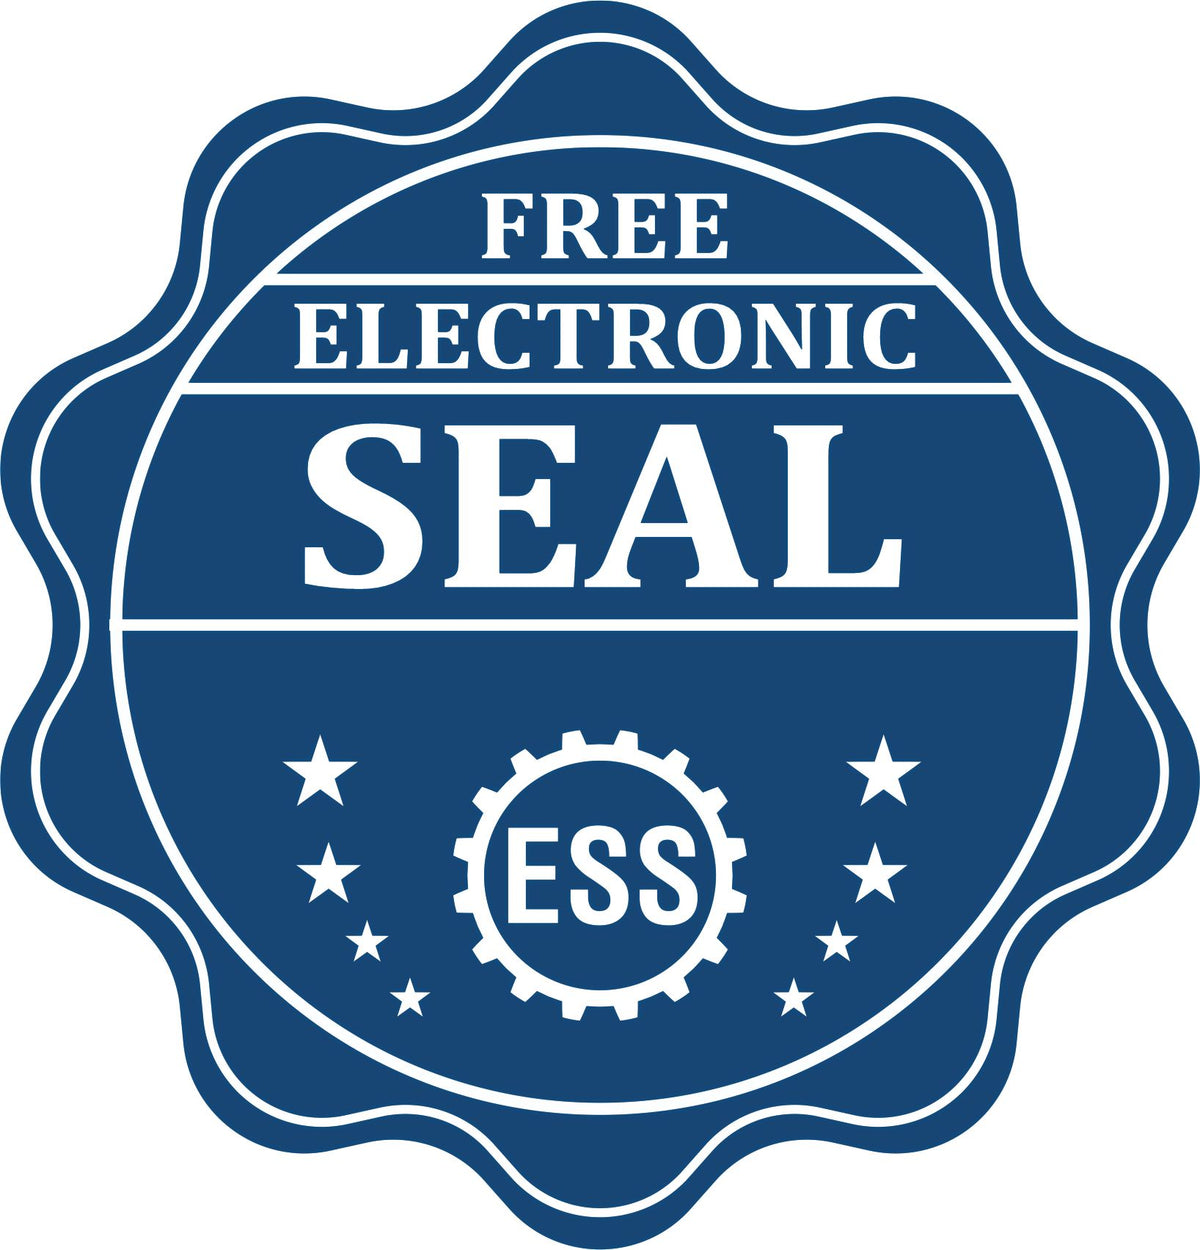 A badge showing a free electronic seal for the Slim Pre-Inked District of Columbia Landscape Architect Seal Stamp with stars and the ESS gear on the emblem.